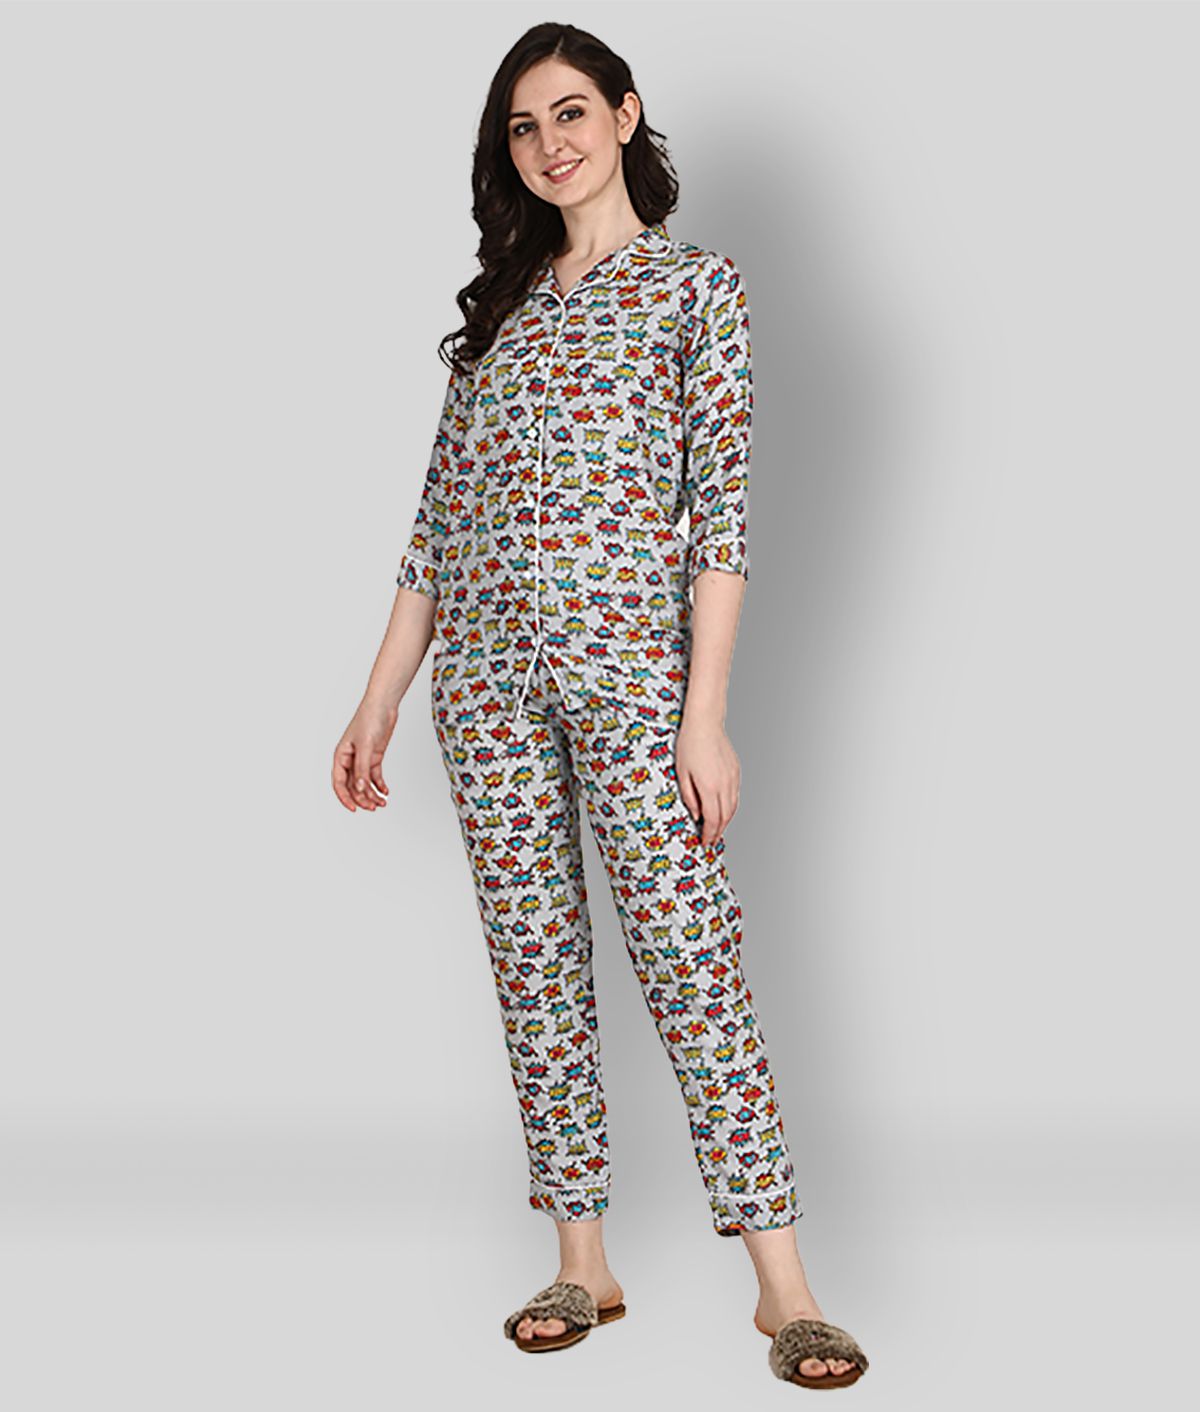     			Berrylicious - Multicolor Rayon Women's Nightwear Nightsuit Sets ( Pack of 1 )